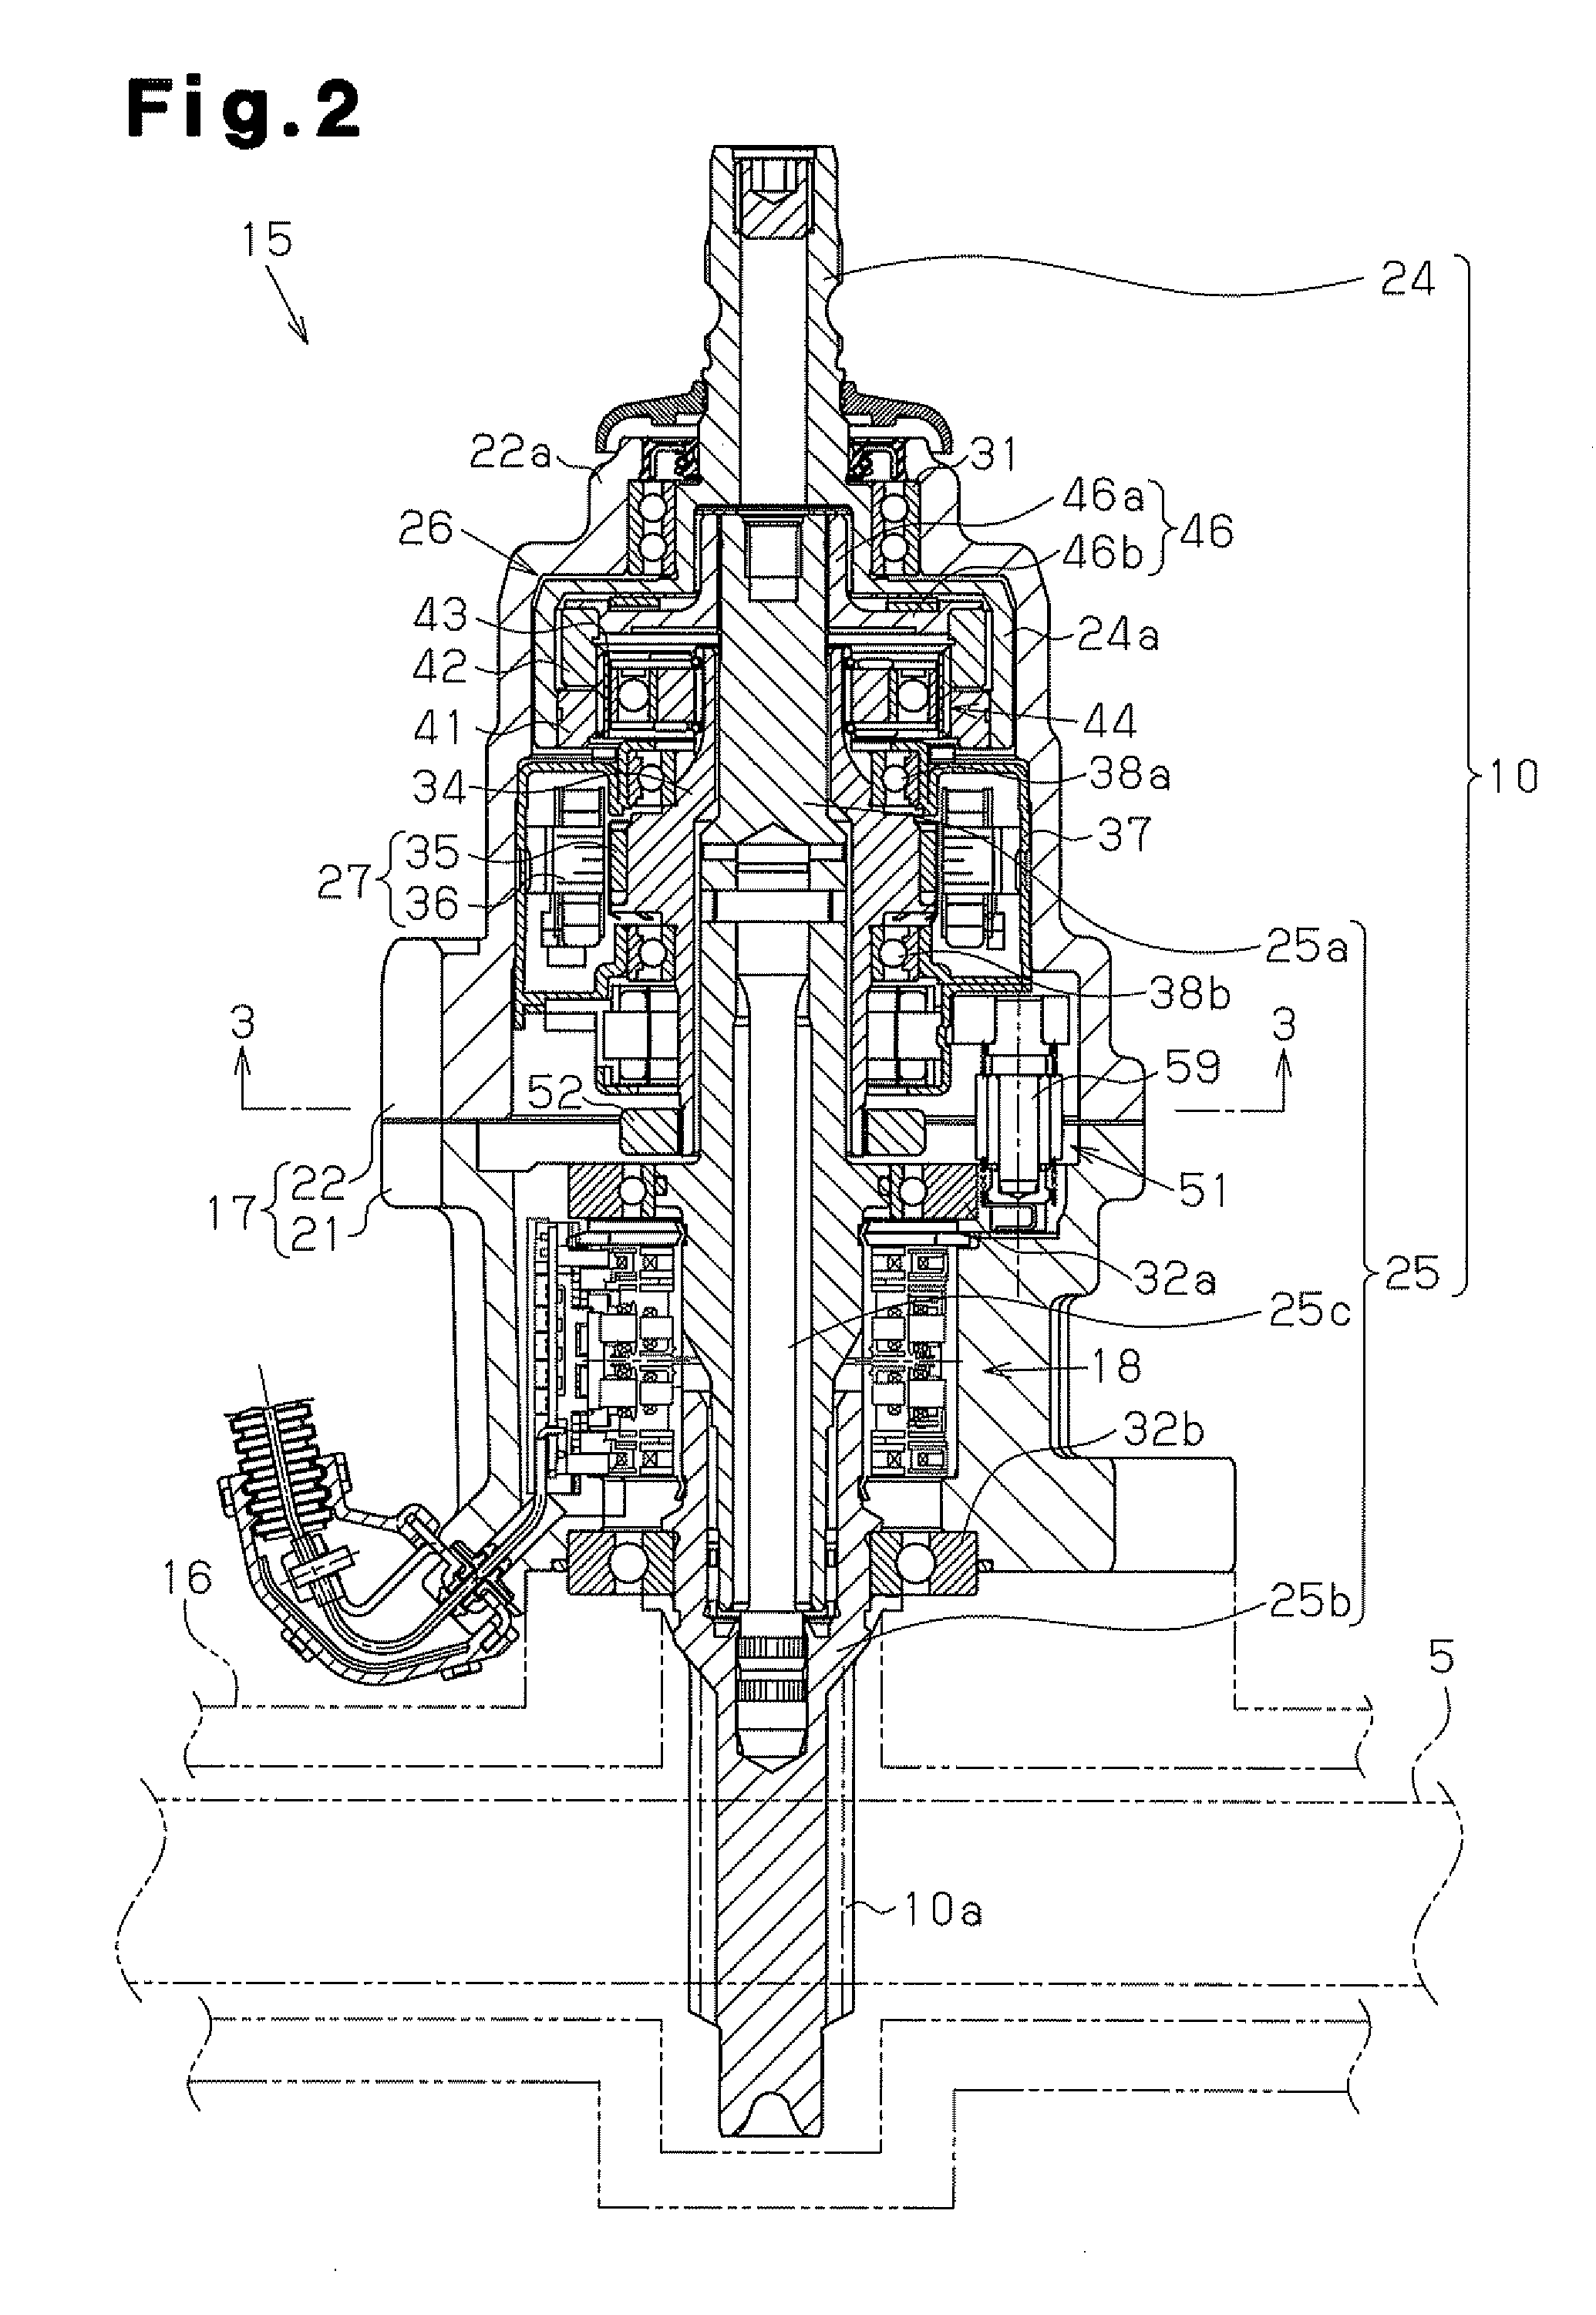 Torque limiter, variable transmission ratio device, and tolerance ring